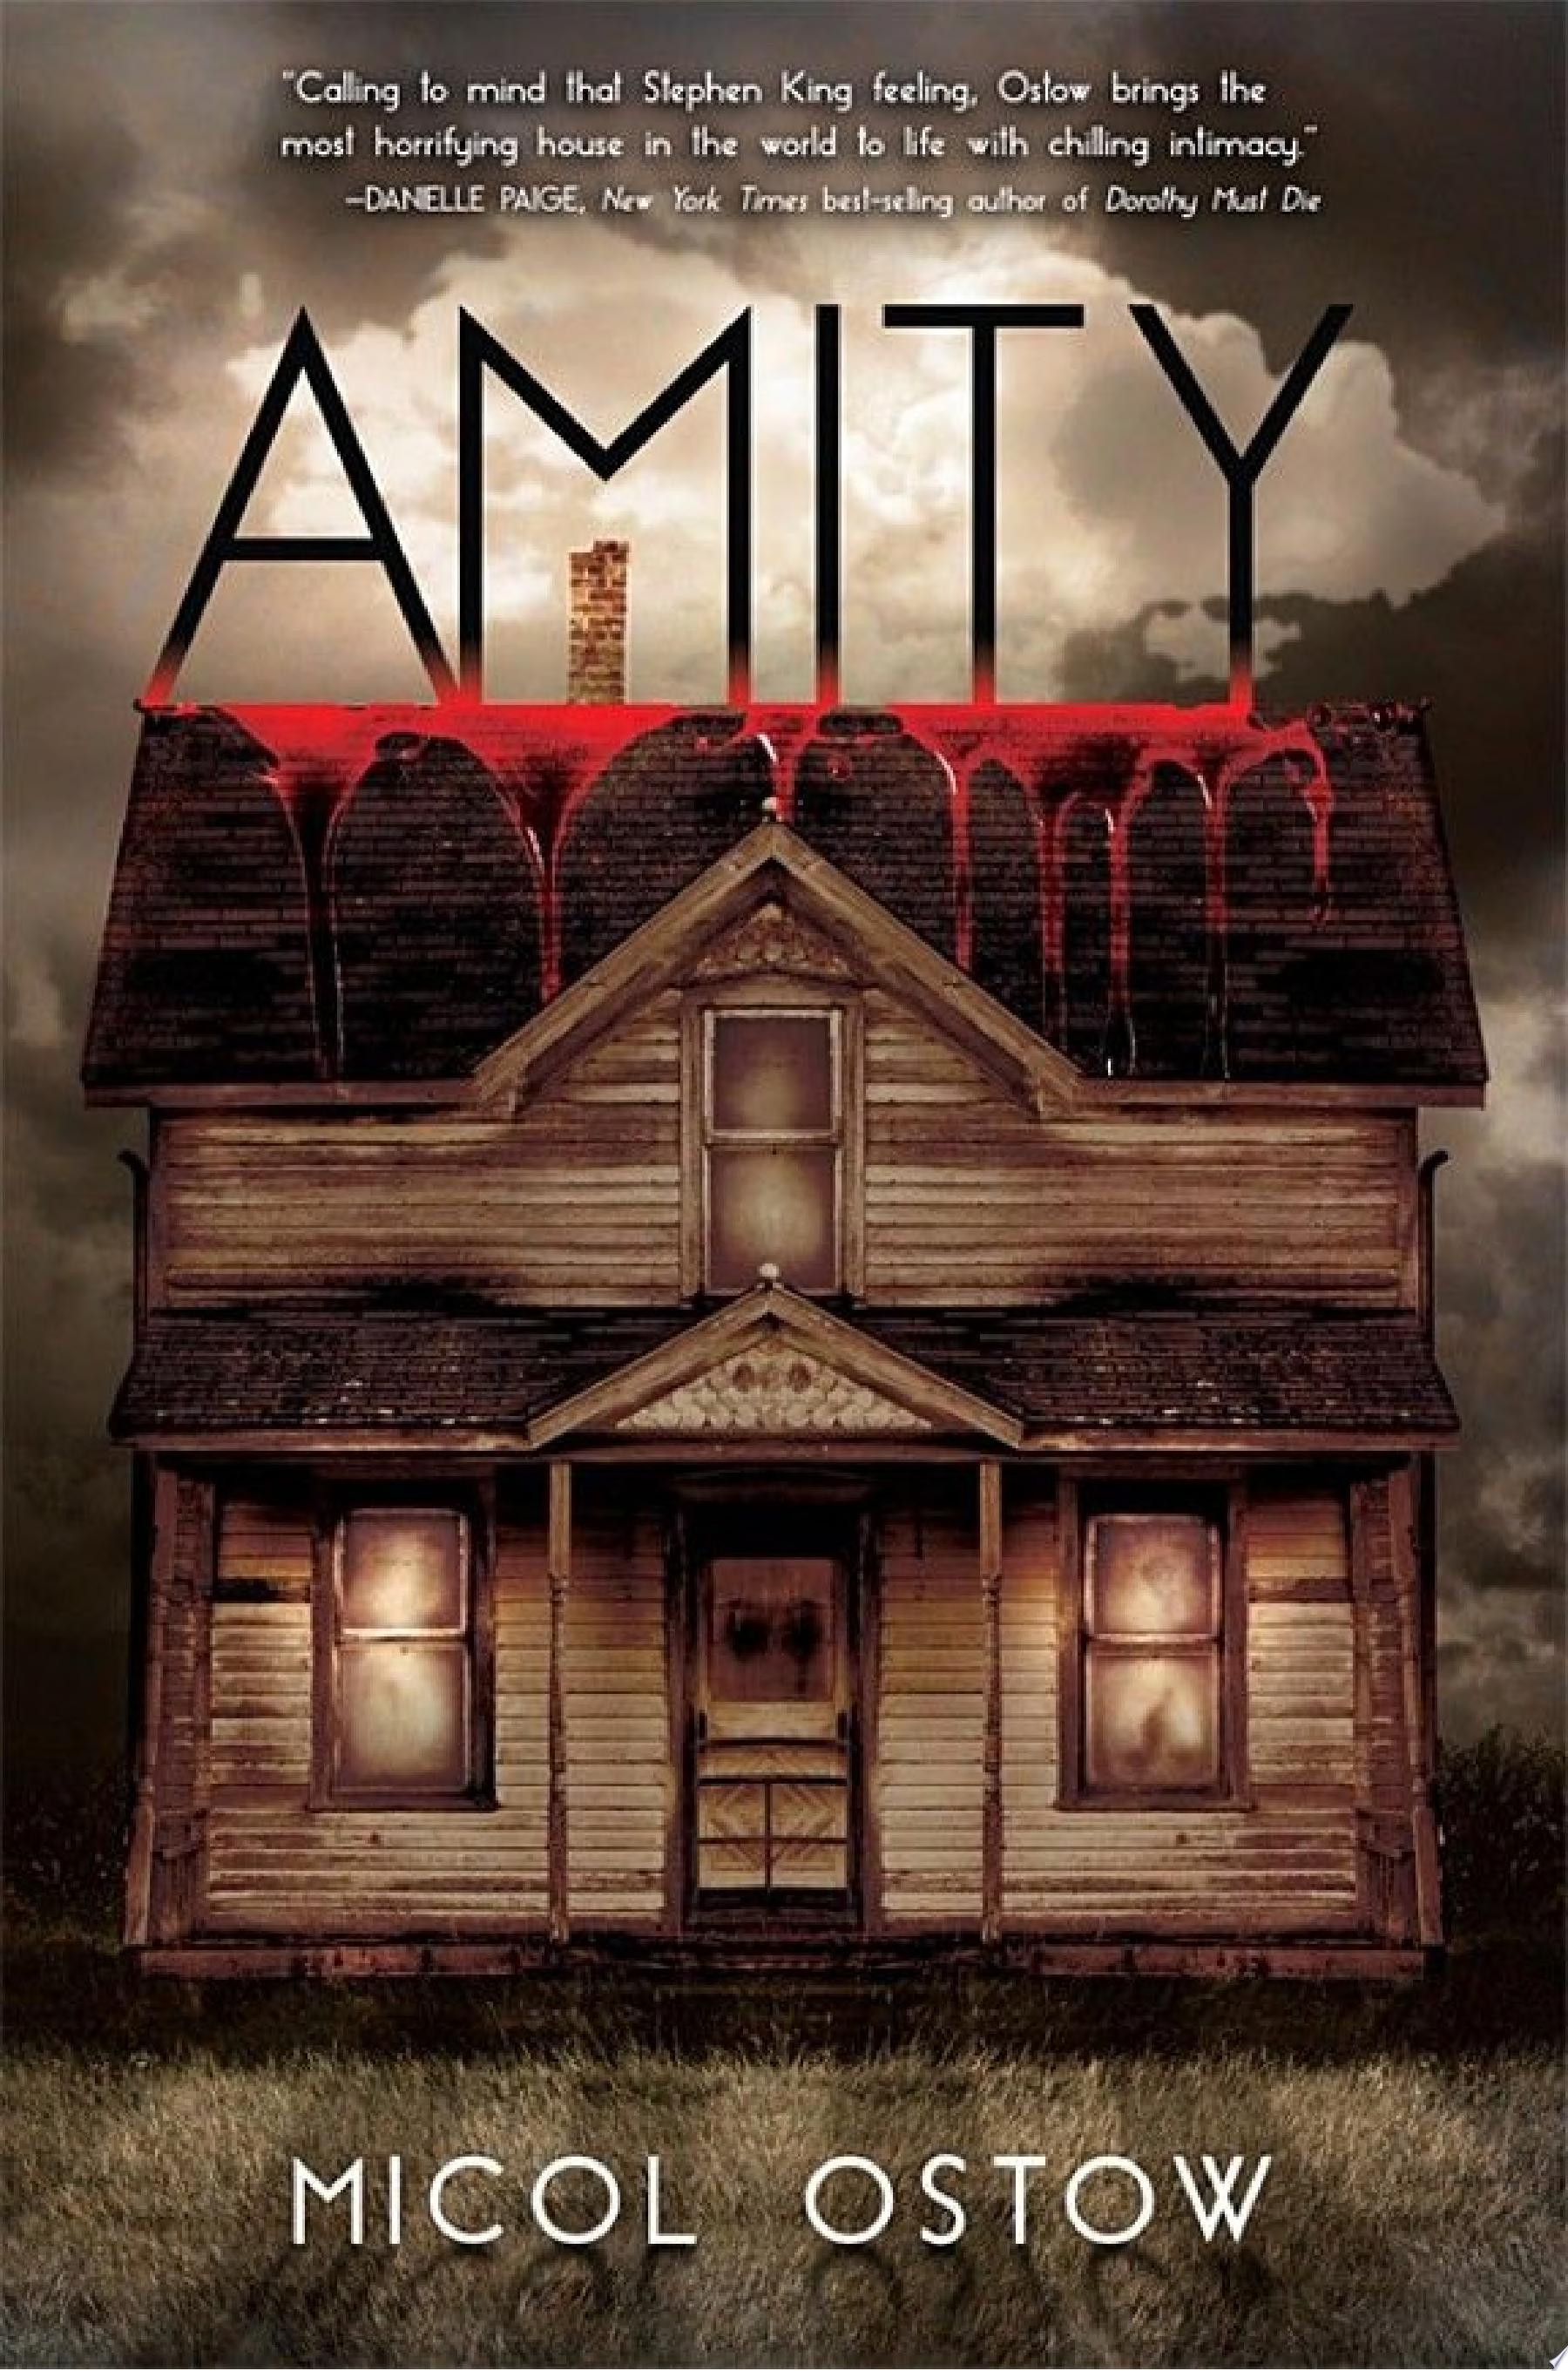 Image for "Amity"